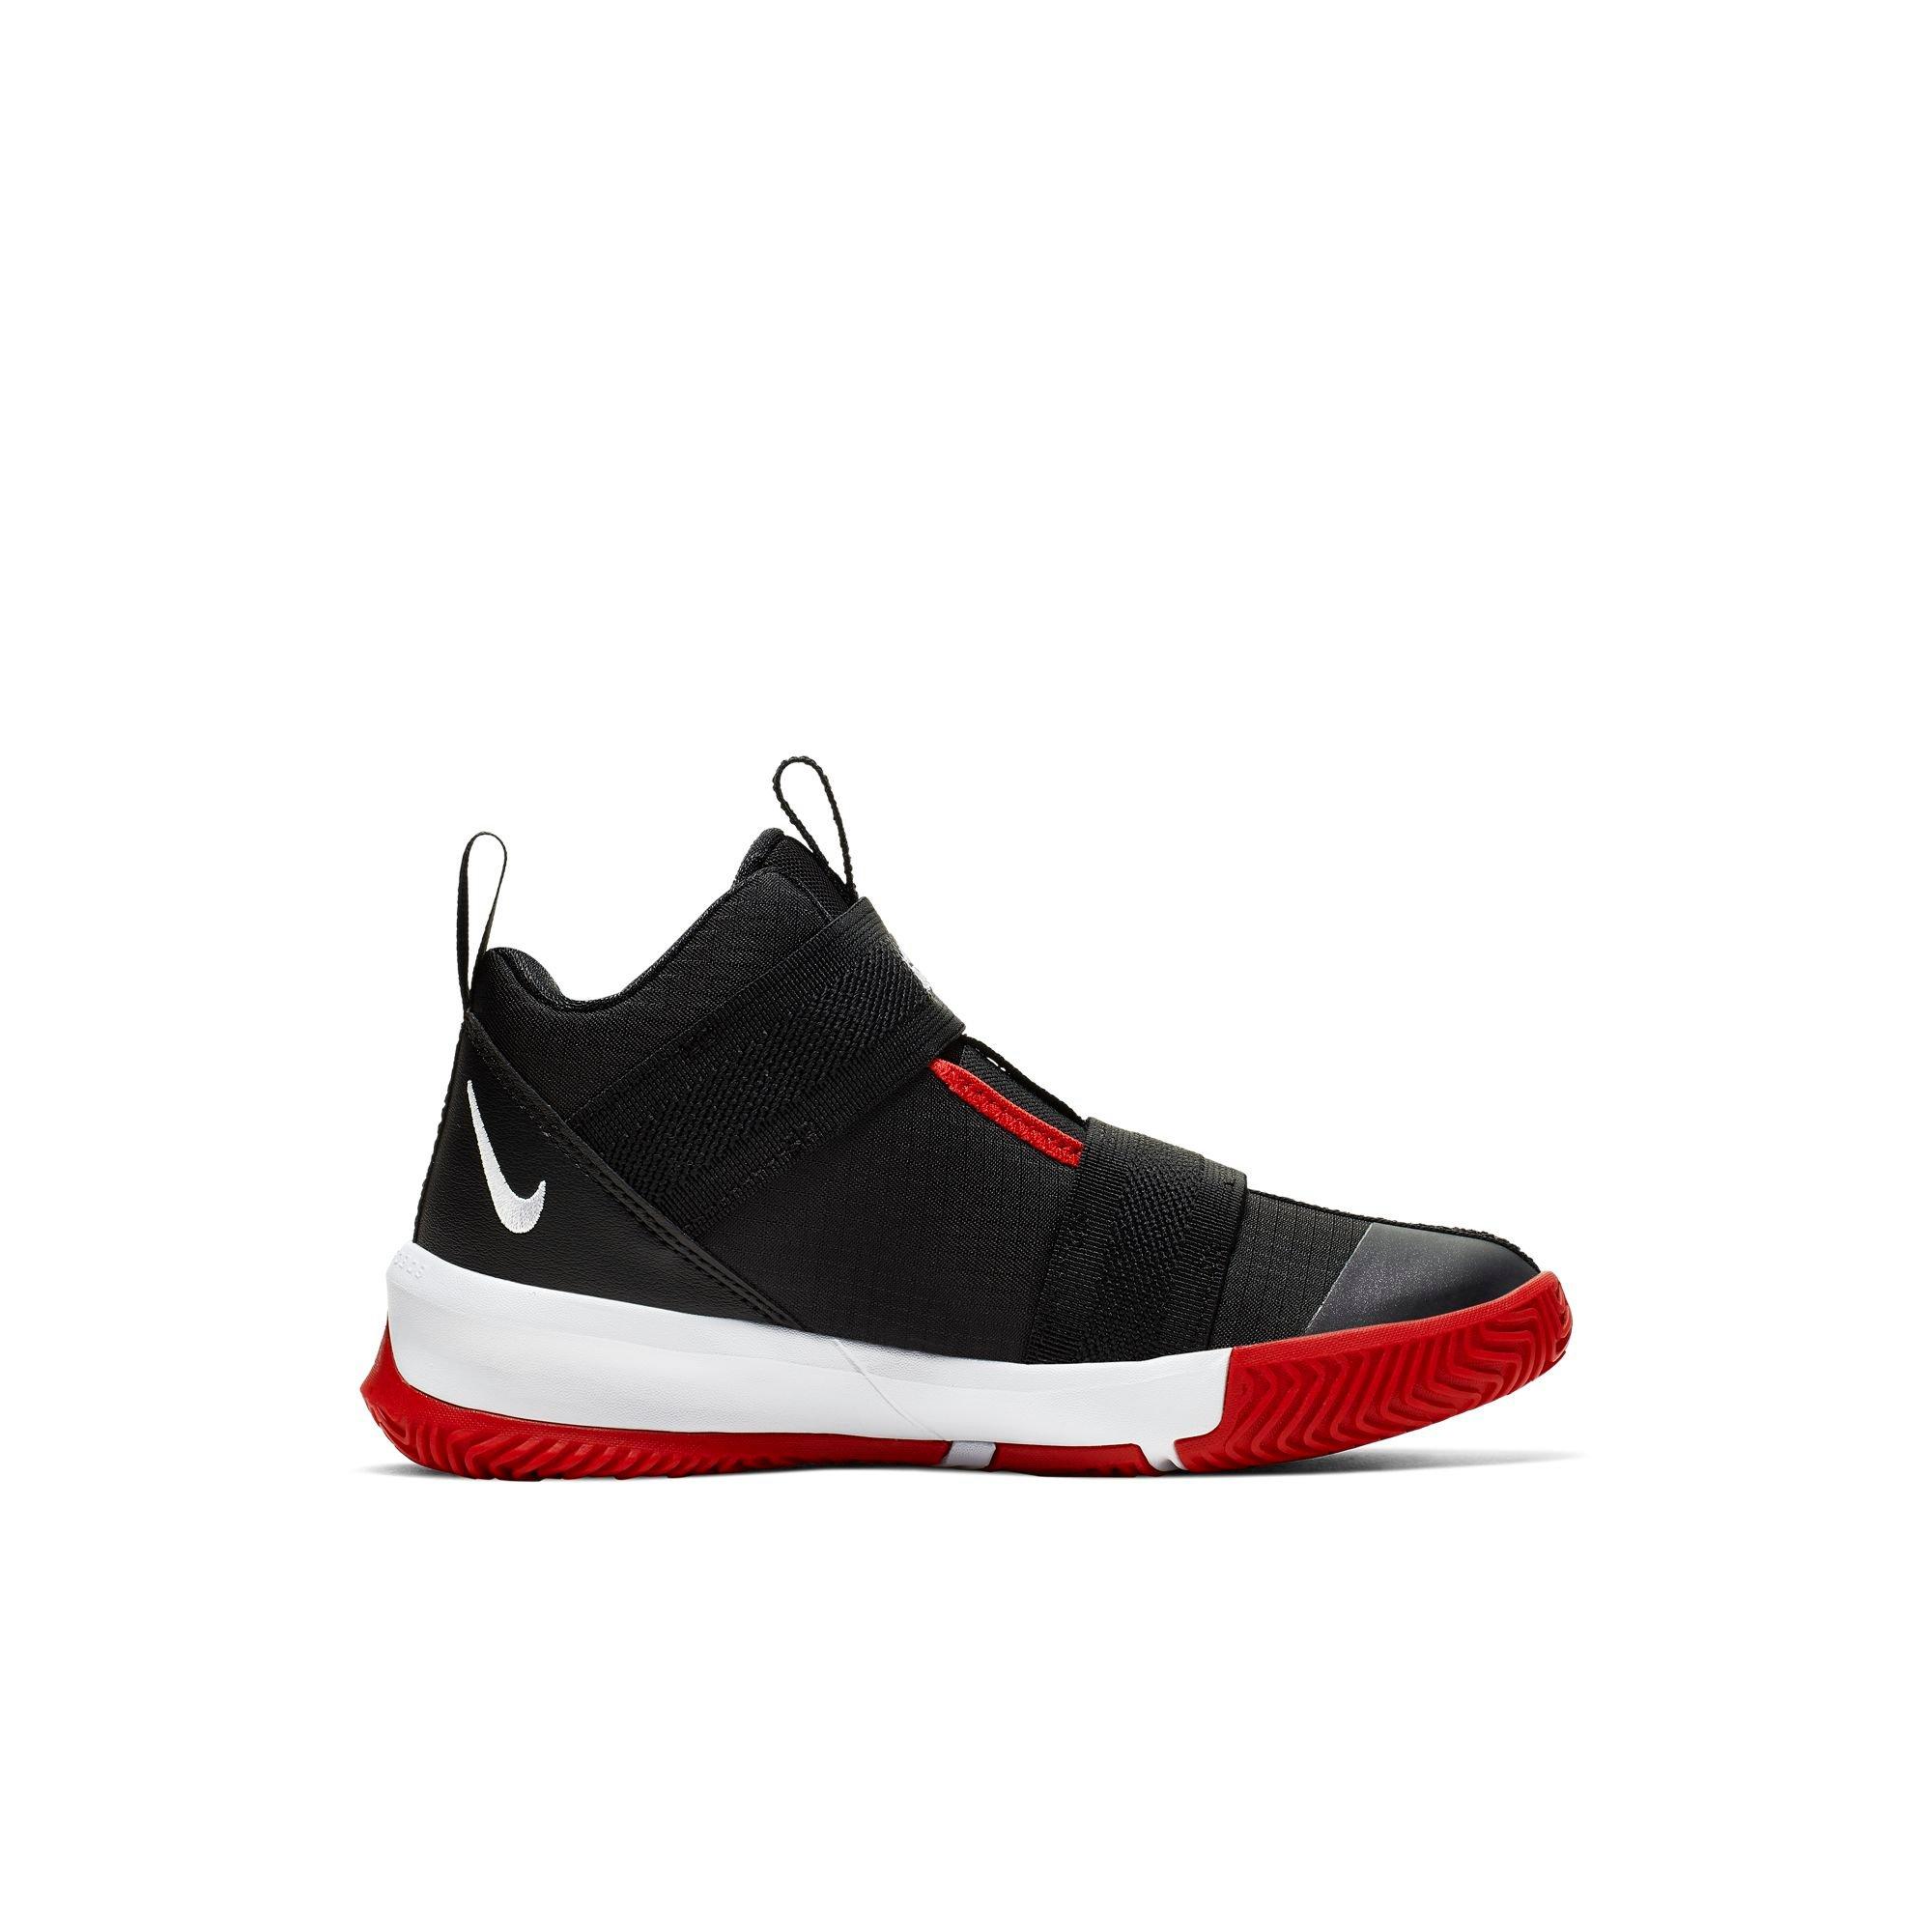 nike shoes red black and white